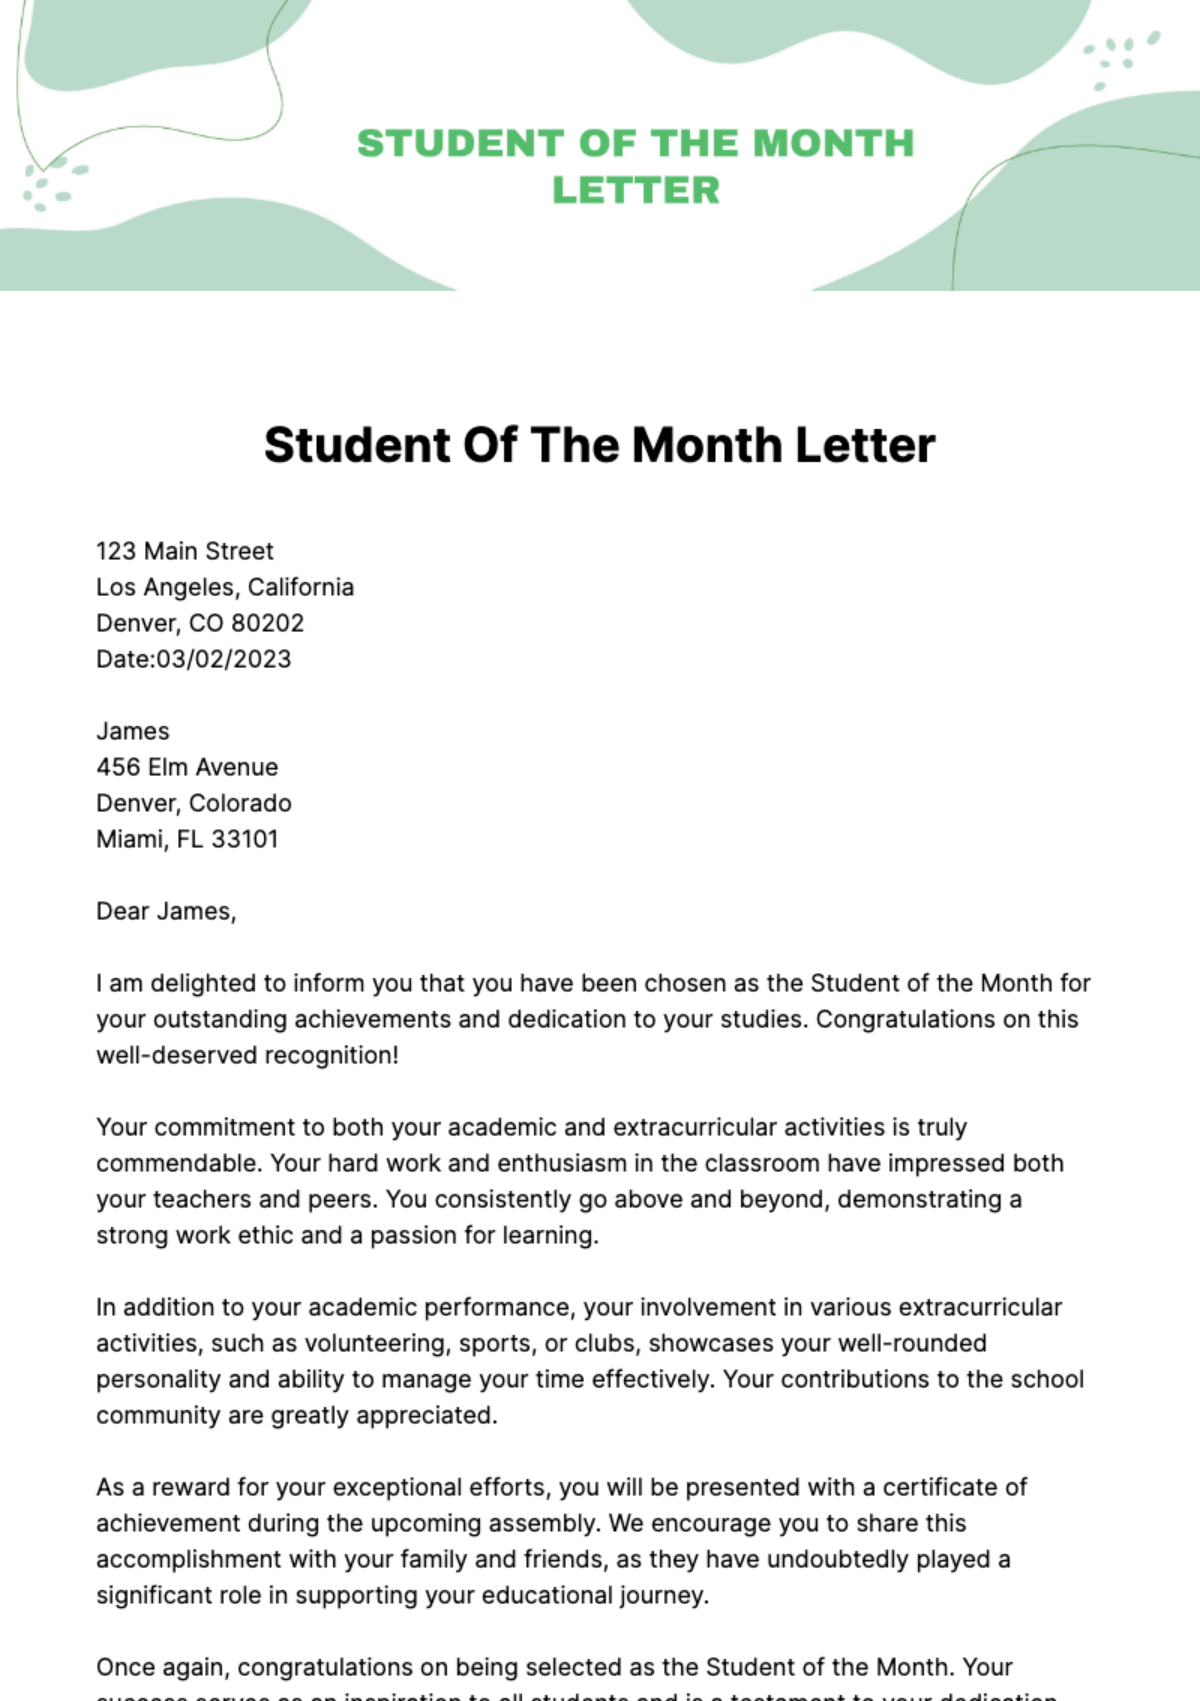 Student Of the Month Letter Template